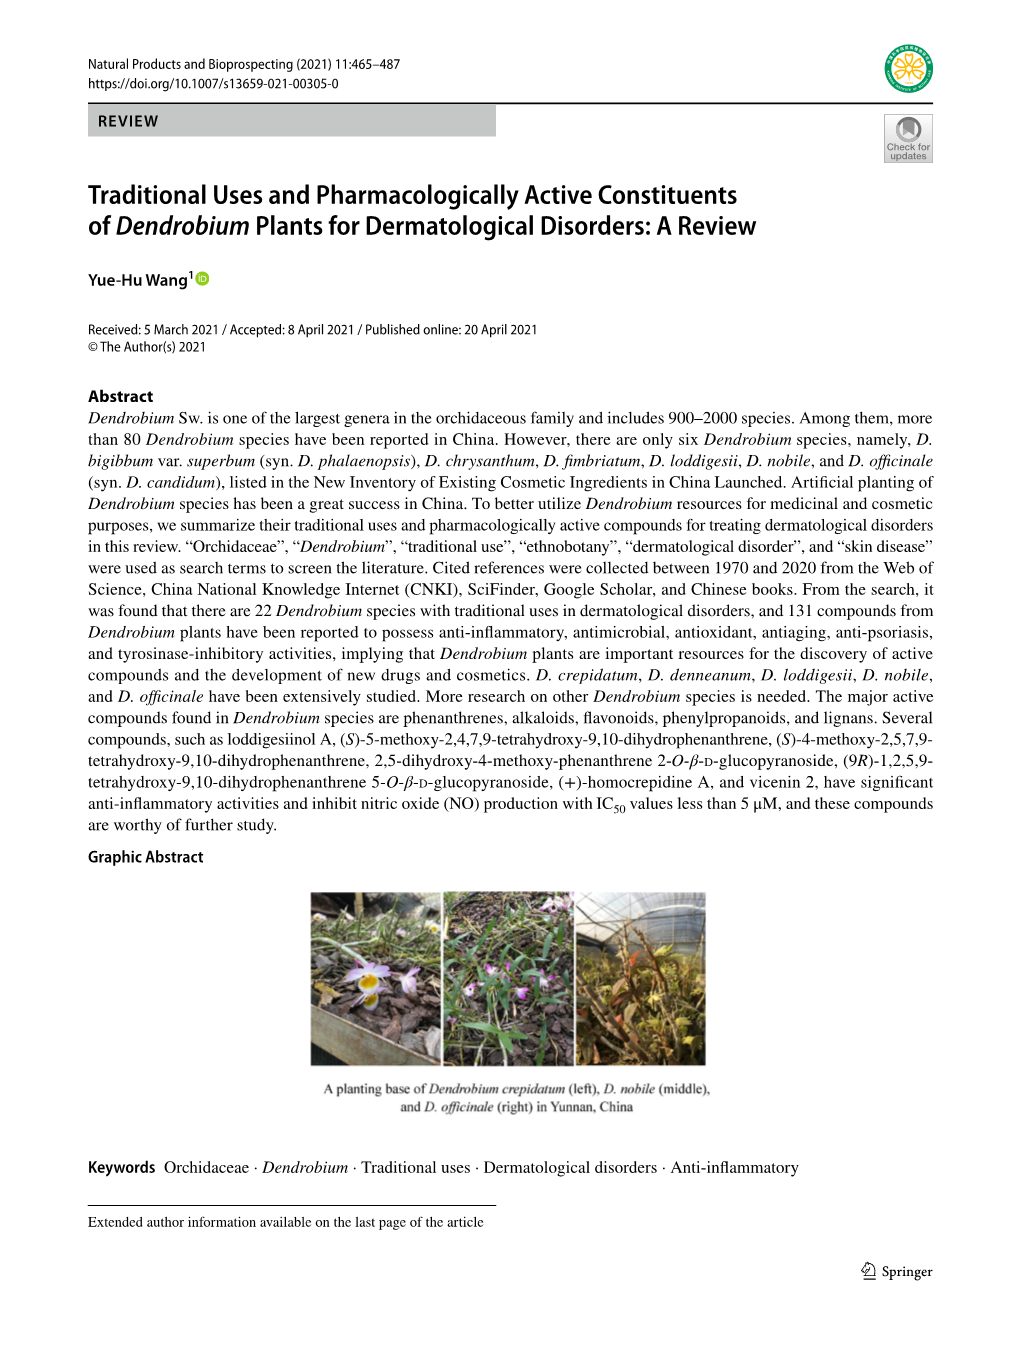 Traditional Uses and Pharmacologically Active Constituents of Dendrobium Plants for Dermatological Disorders: a Review